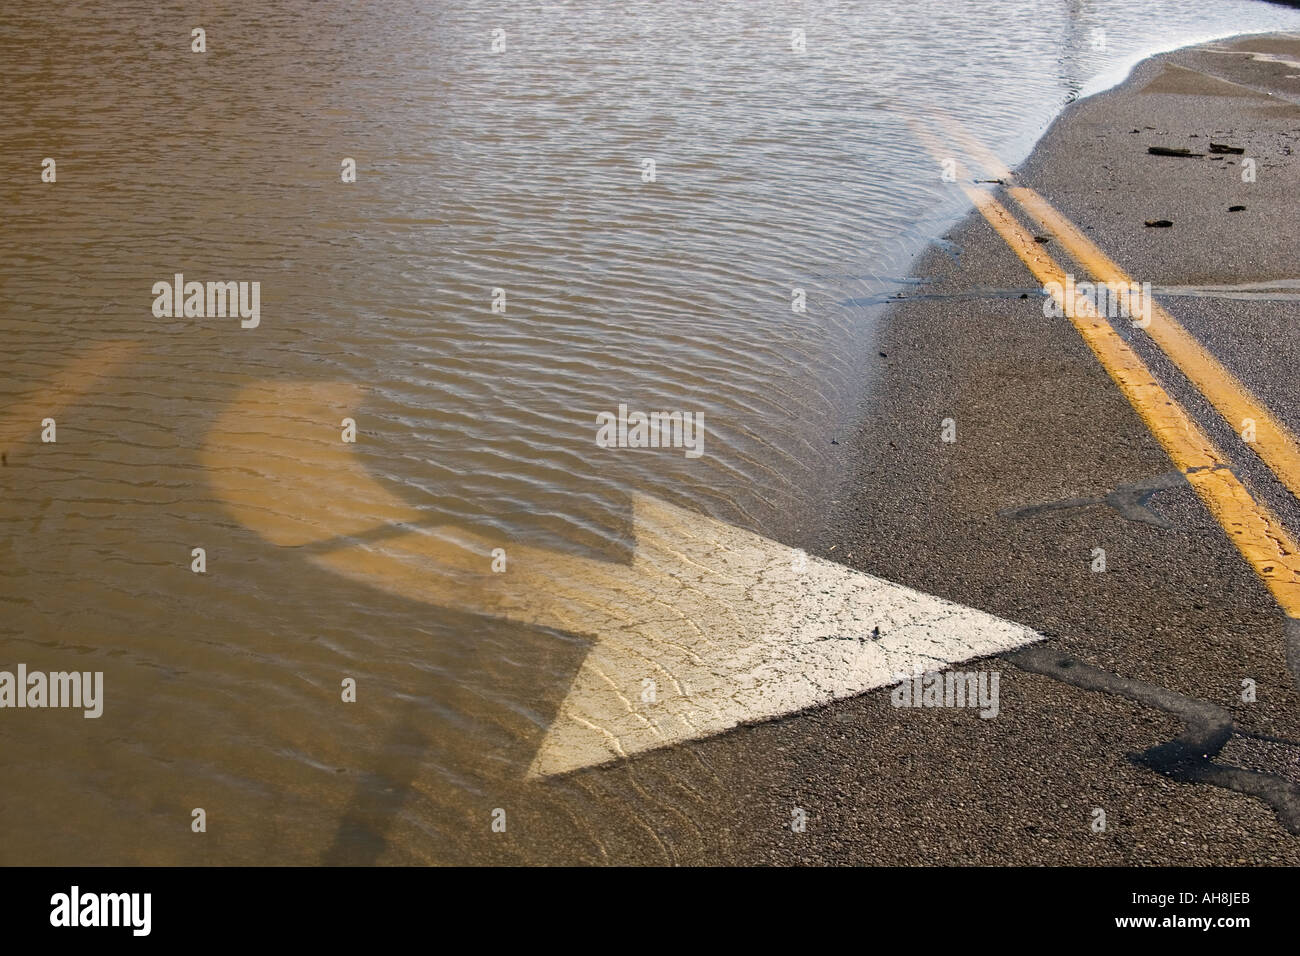 Flood waters rise over roadway in Turning Lane Stock Photo